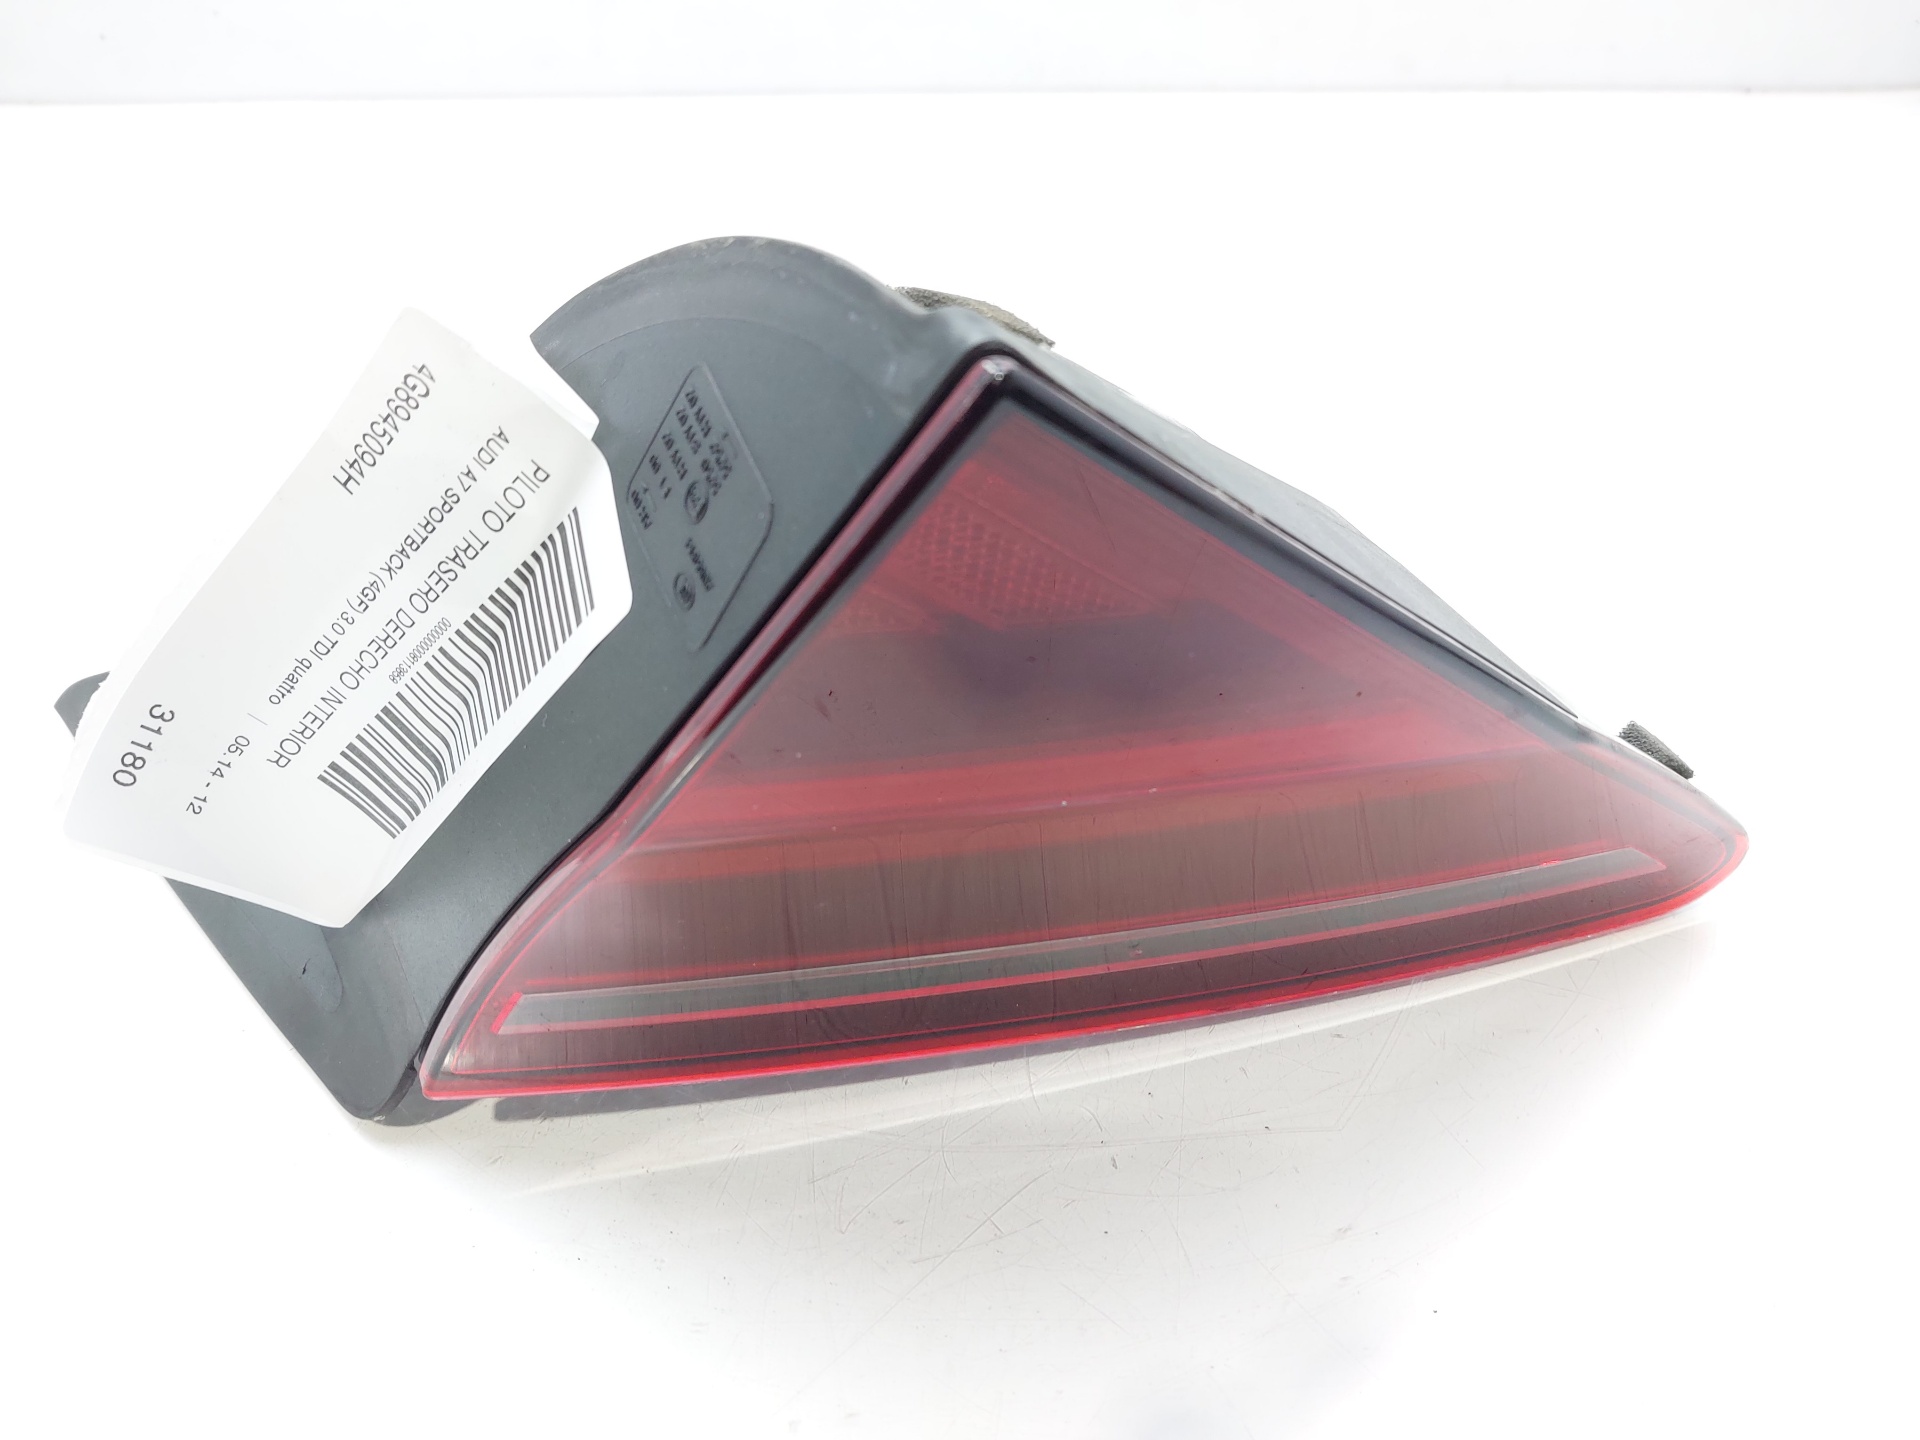 AUDI A6 allroad C7 (2012-2019) Rear Right Taillight Lamp 4G8945094H 24133873